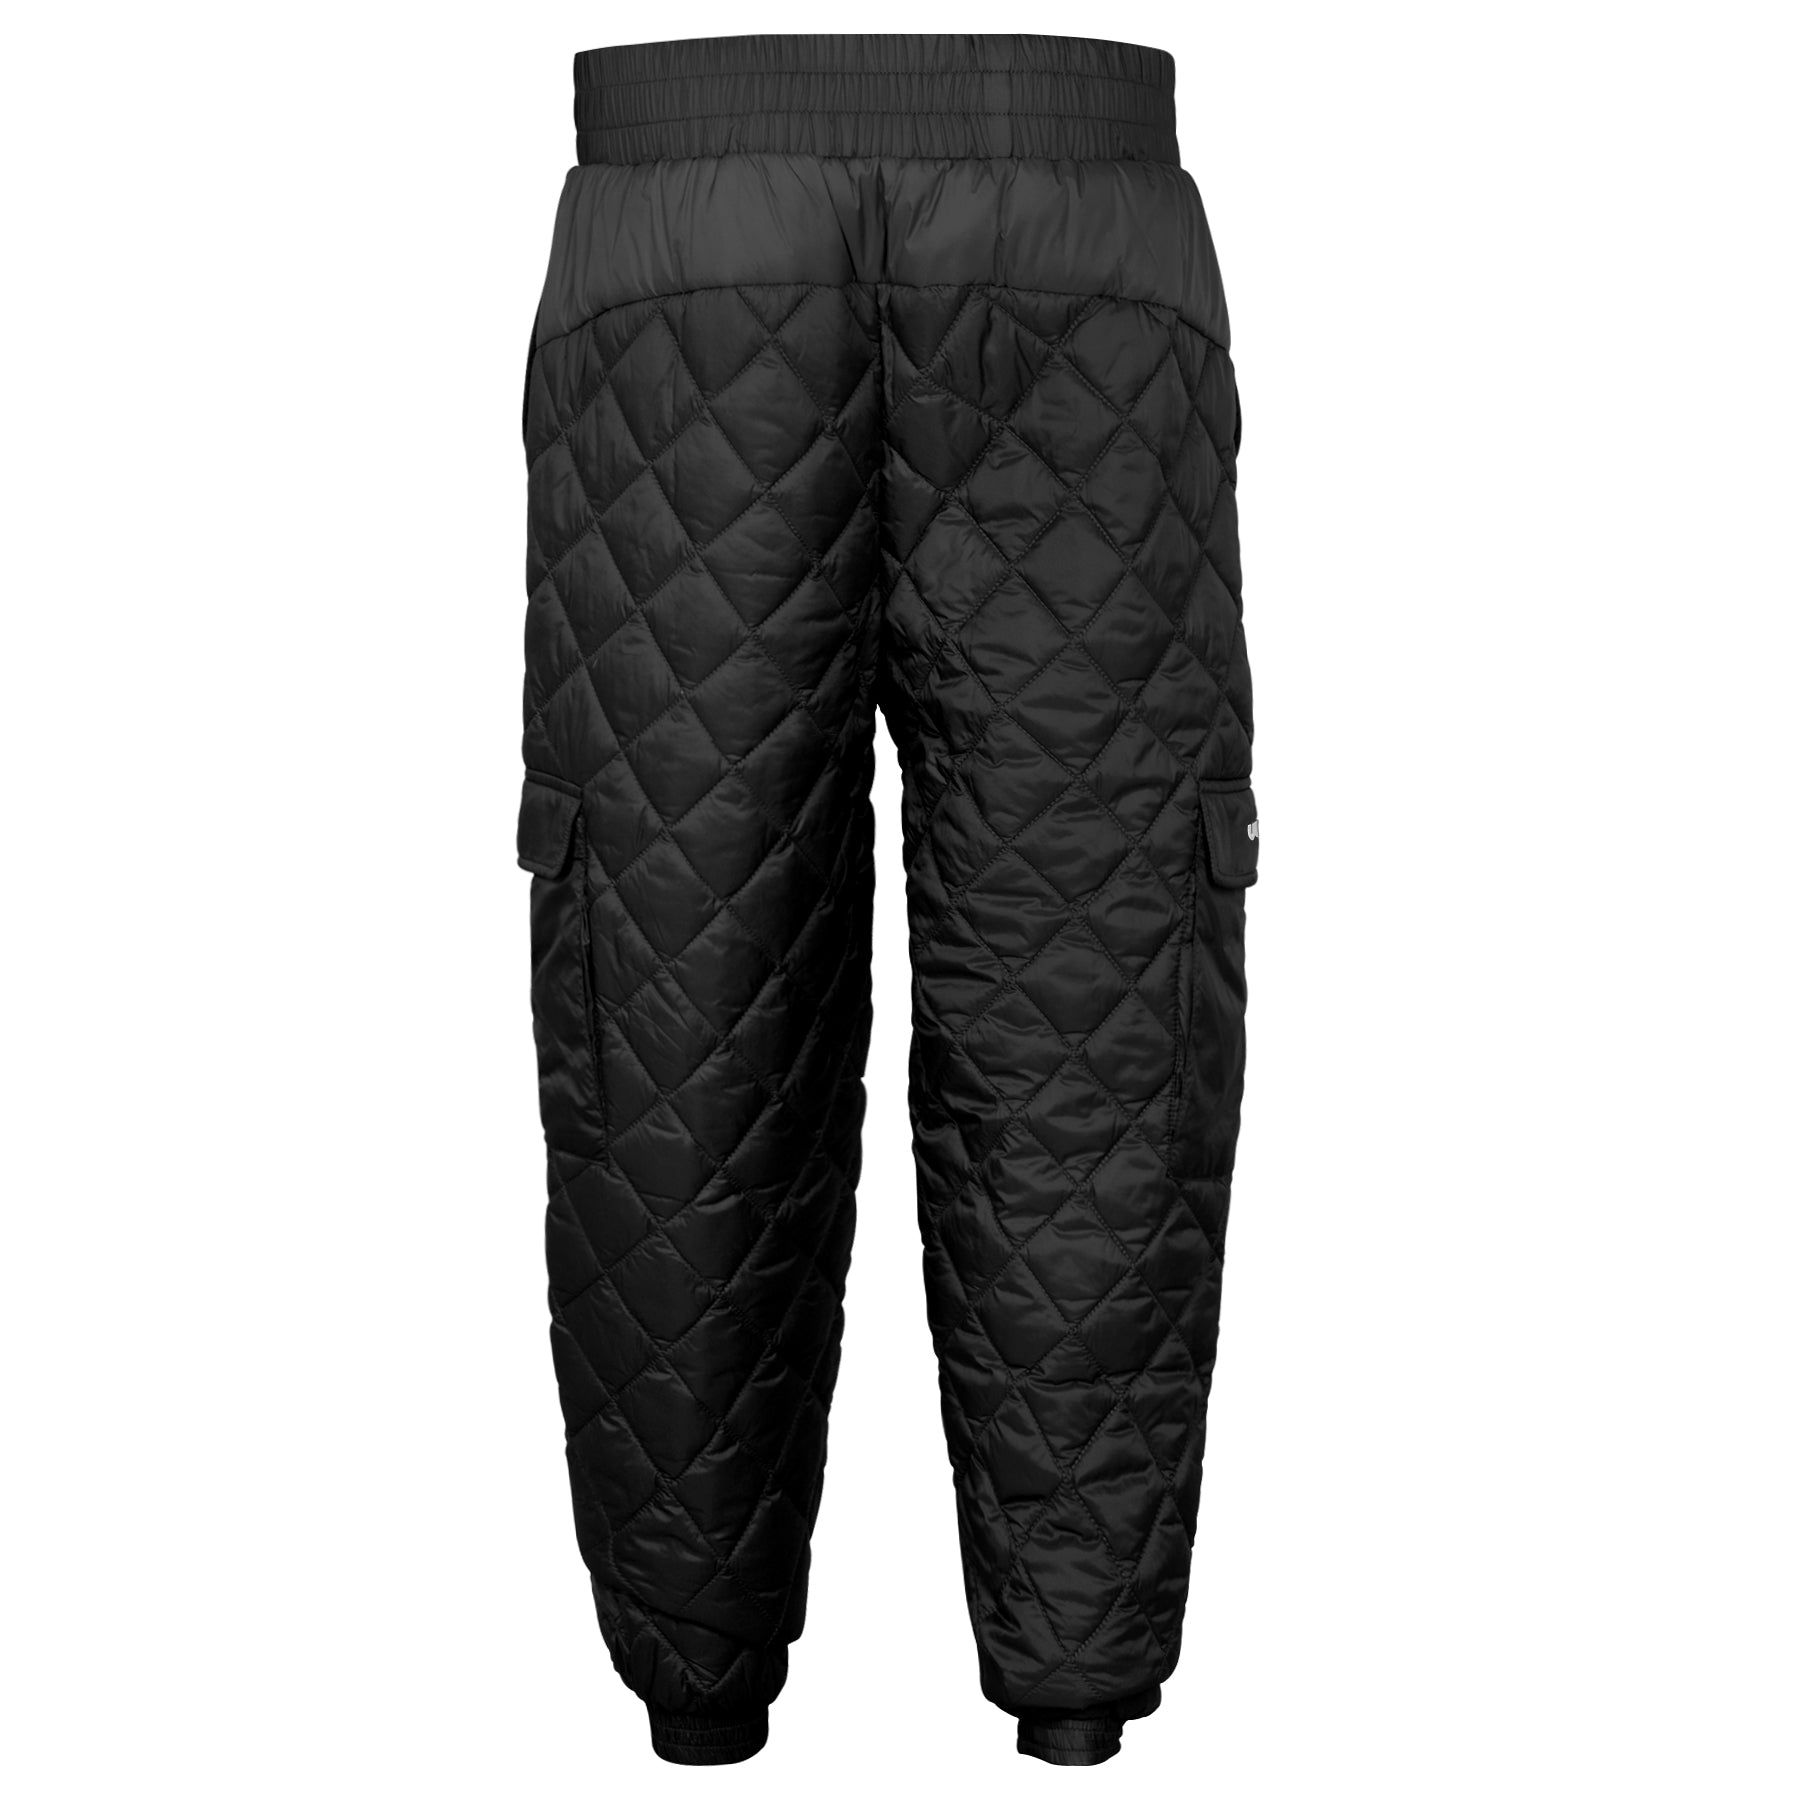 WOMENS QUILTED SWEATPANT